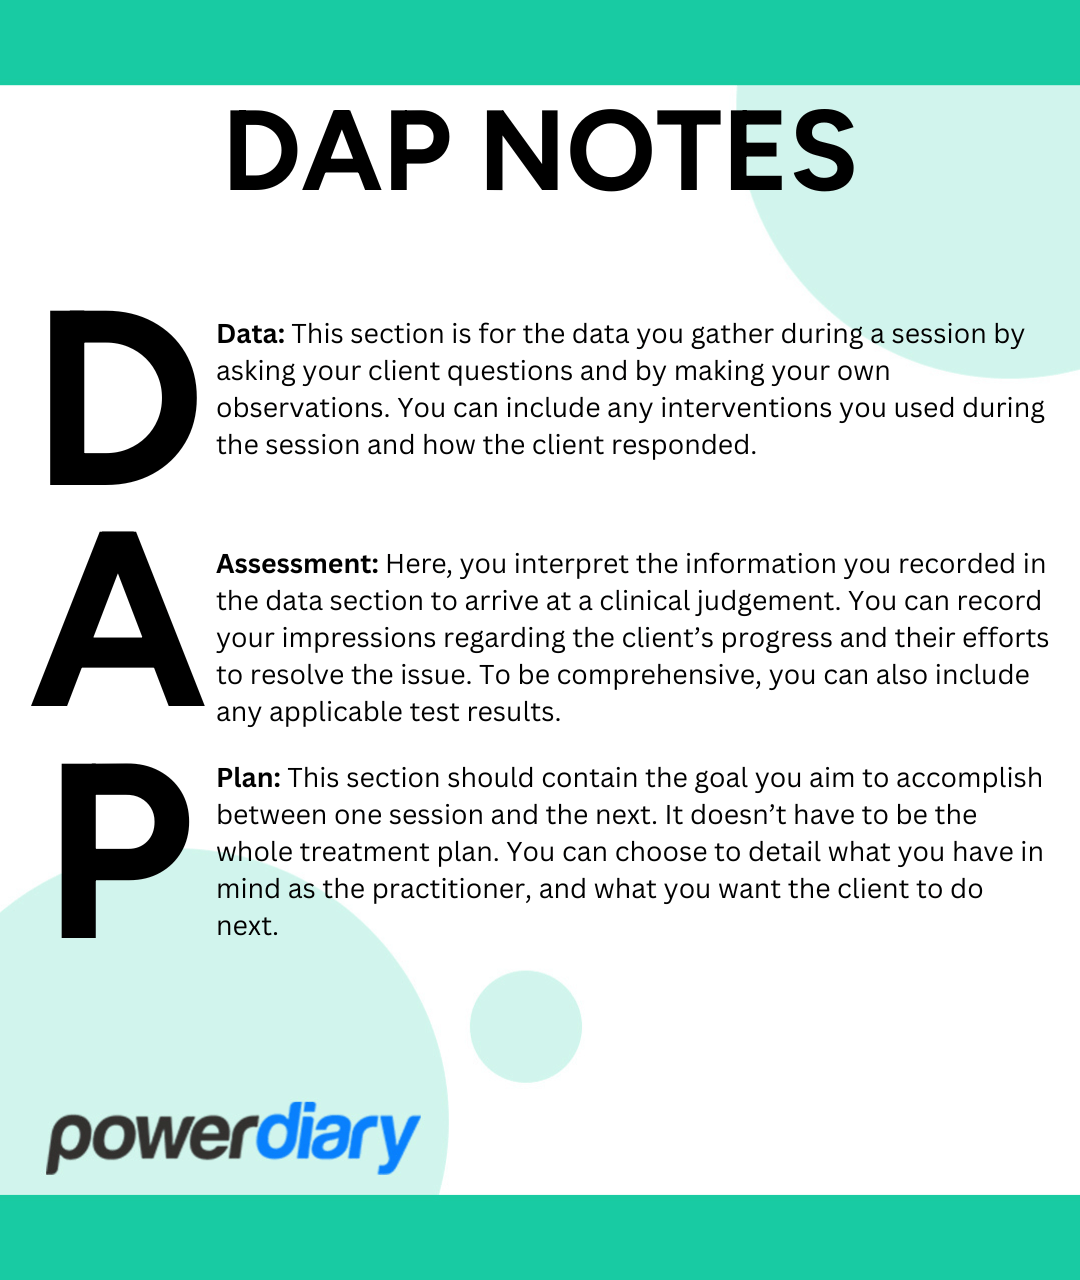 what-s-the-difference-soap-notes-vs-dap-notes-power-diary